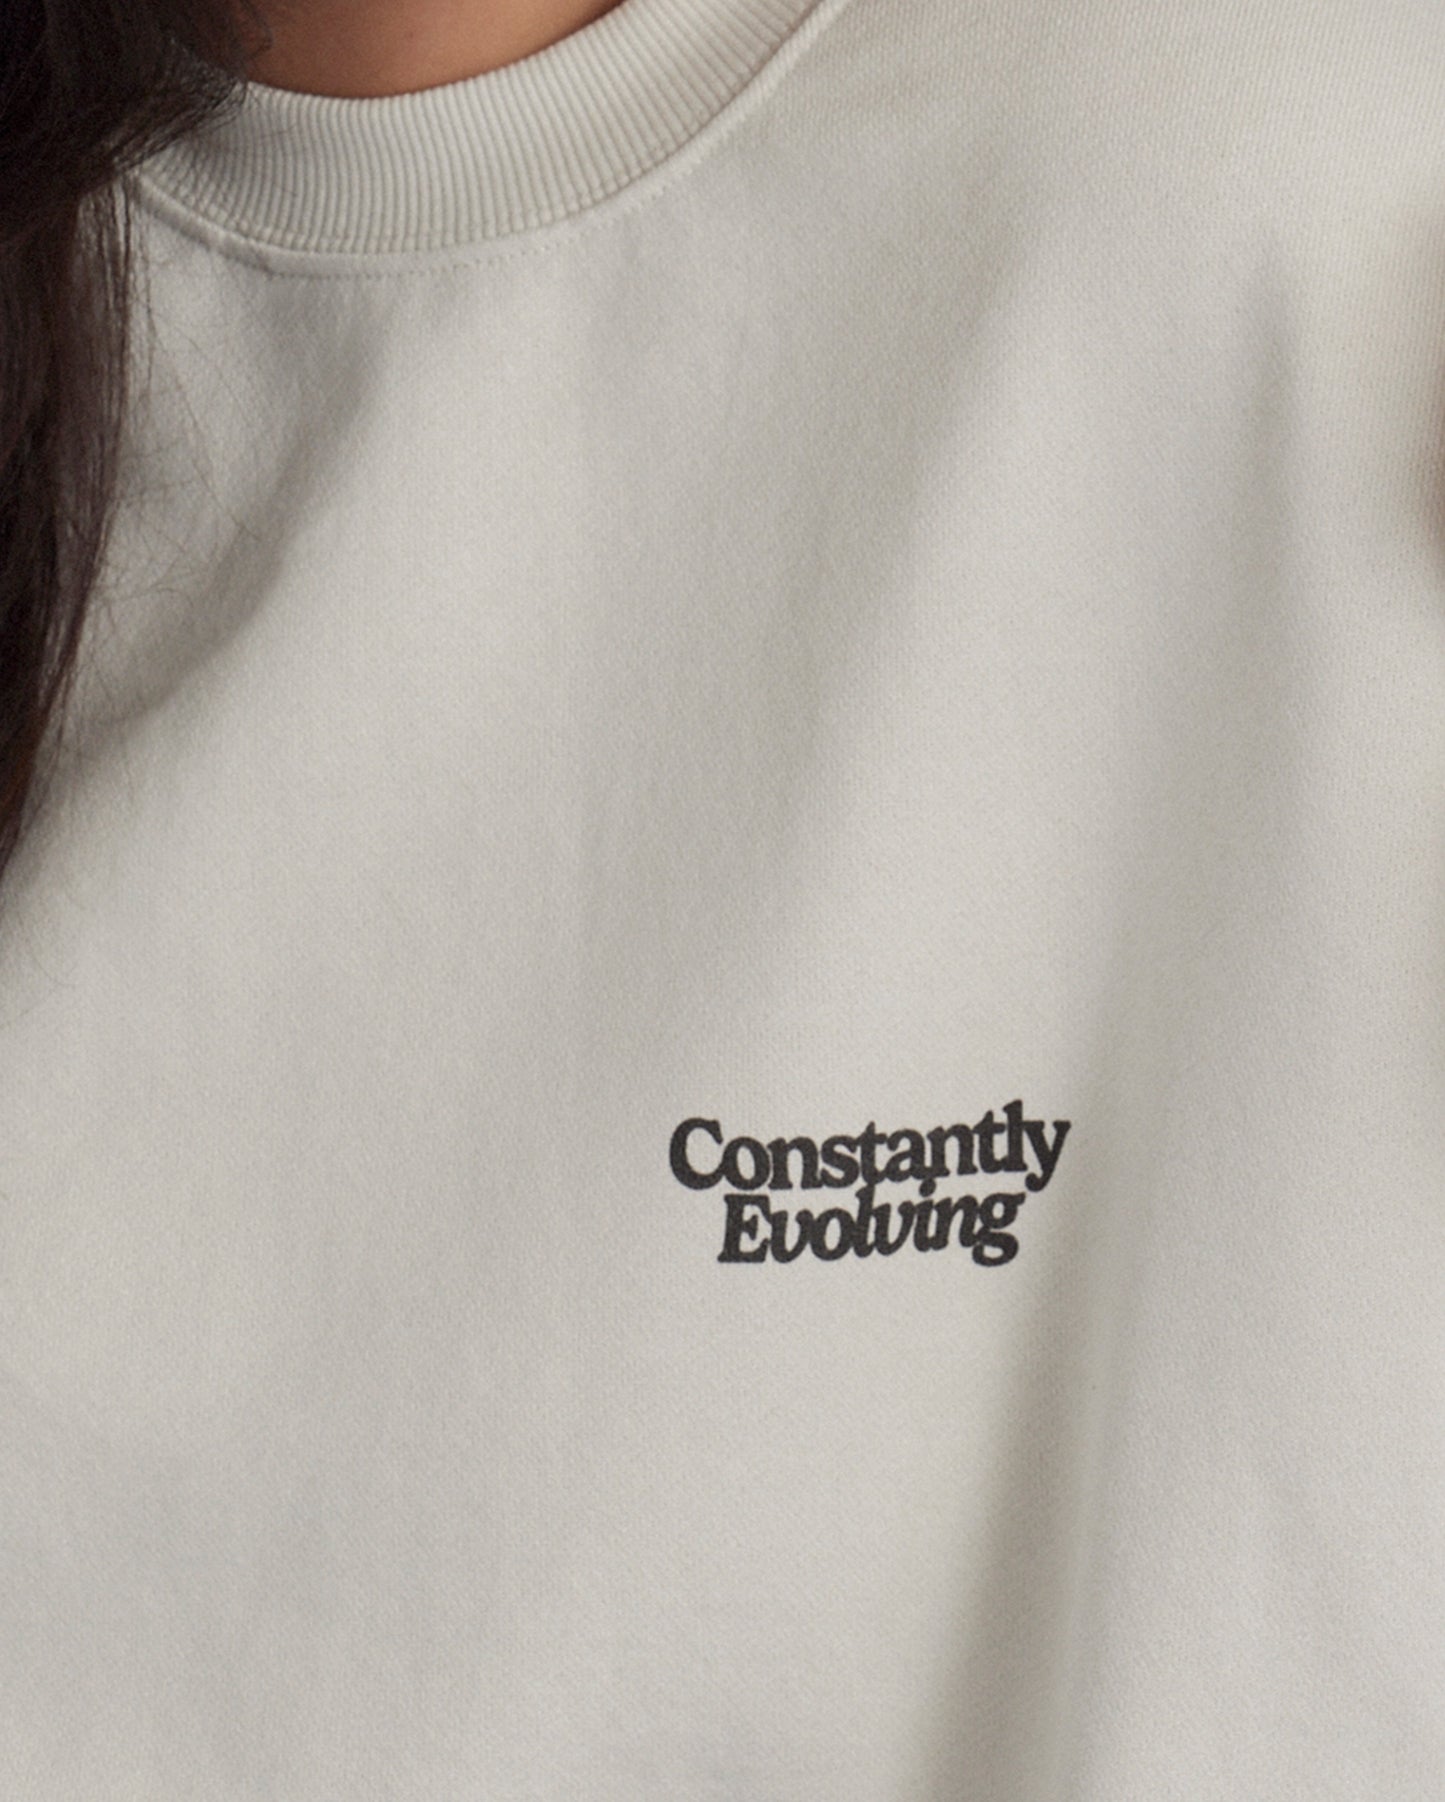 Oversized Sweater, Vintage White,  'Constantly Evolving'